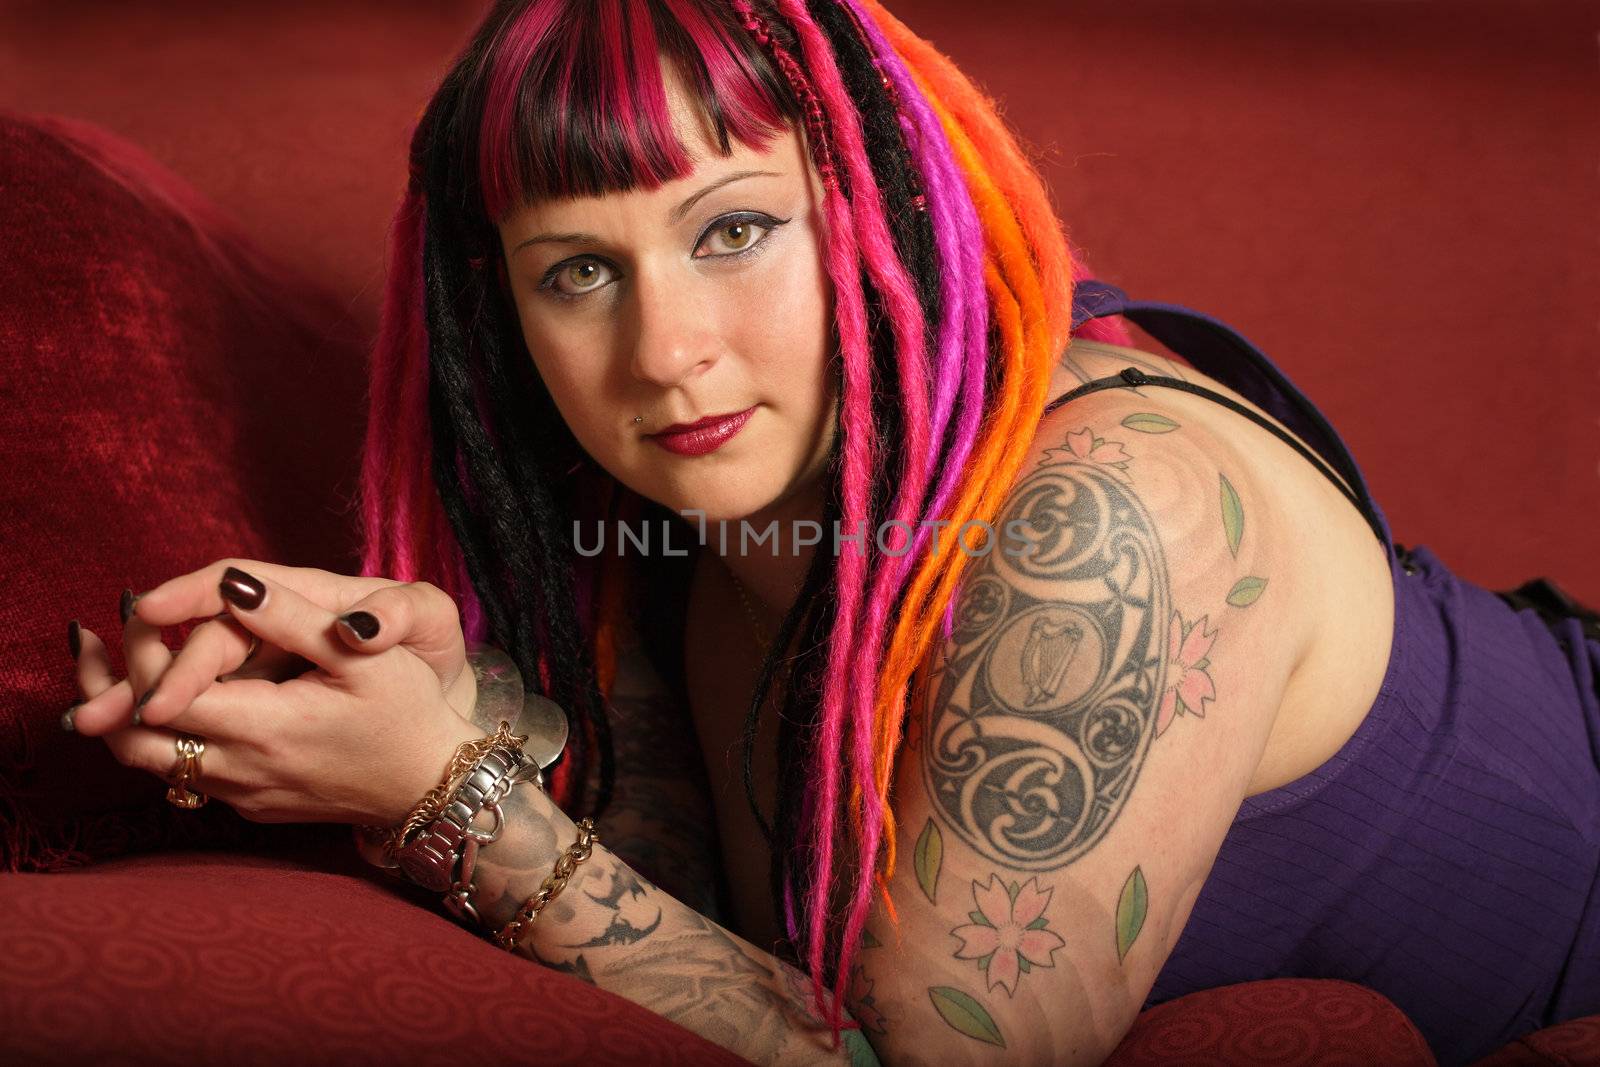 Portrait of a beautiful female goth with dreadlocks on a red couch.
